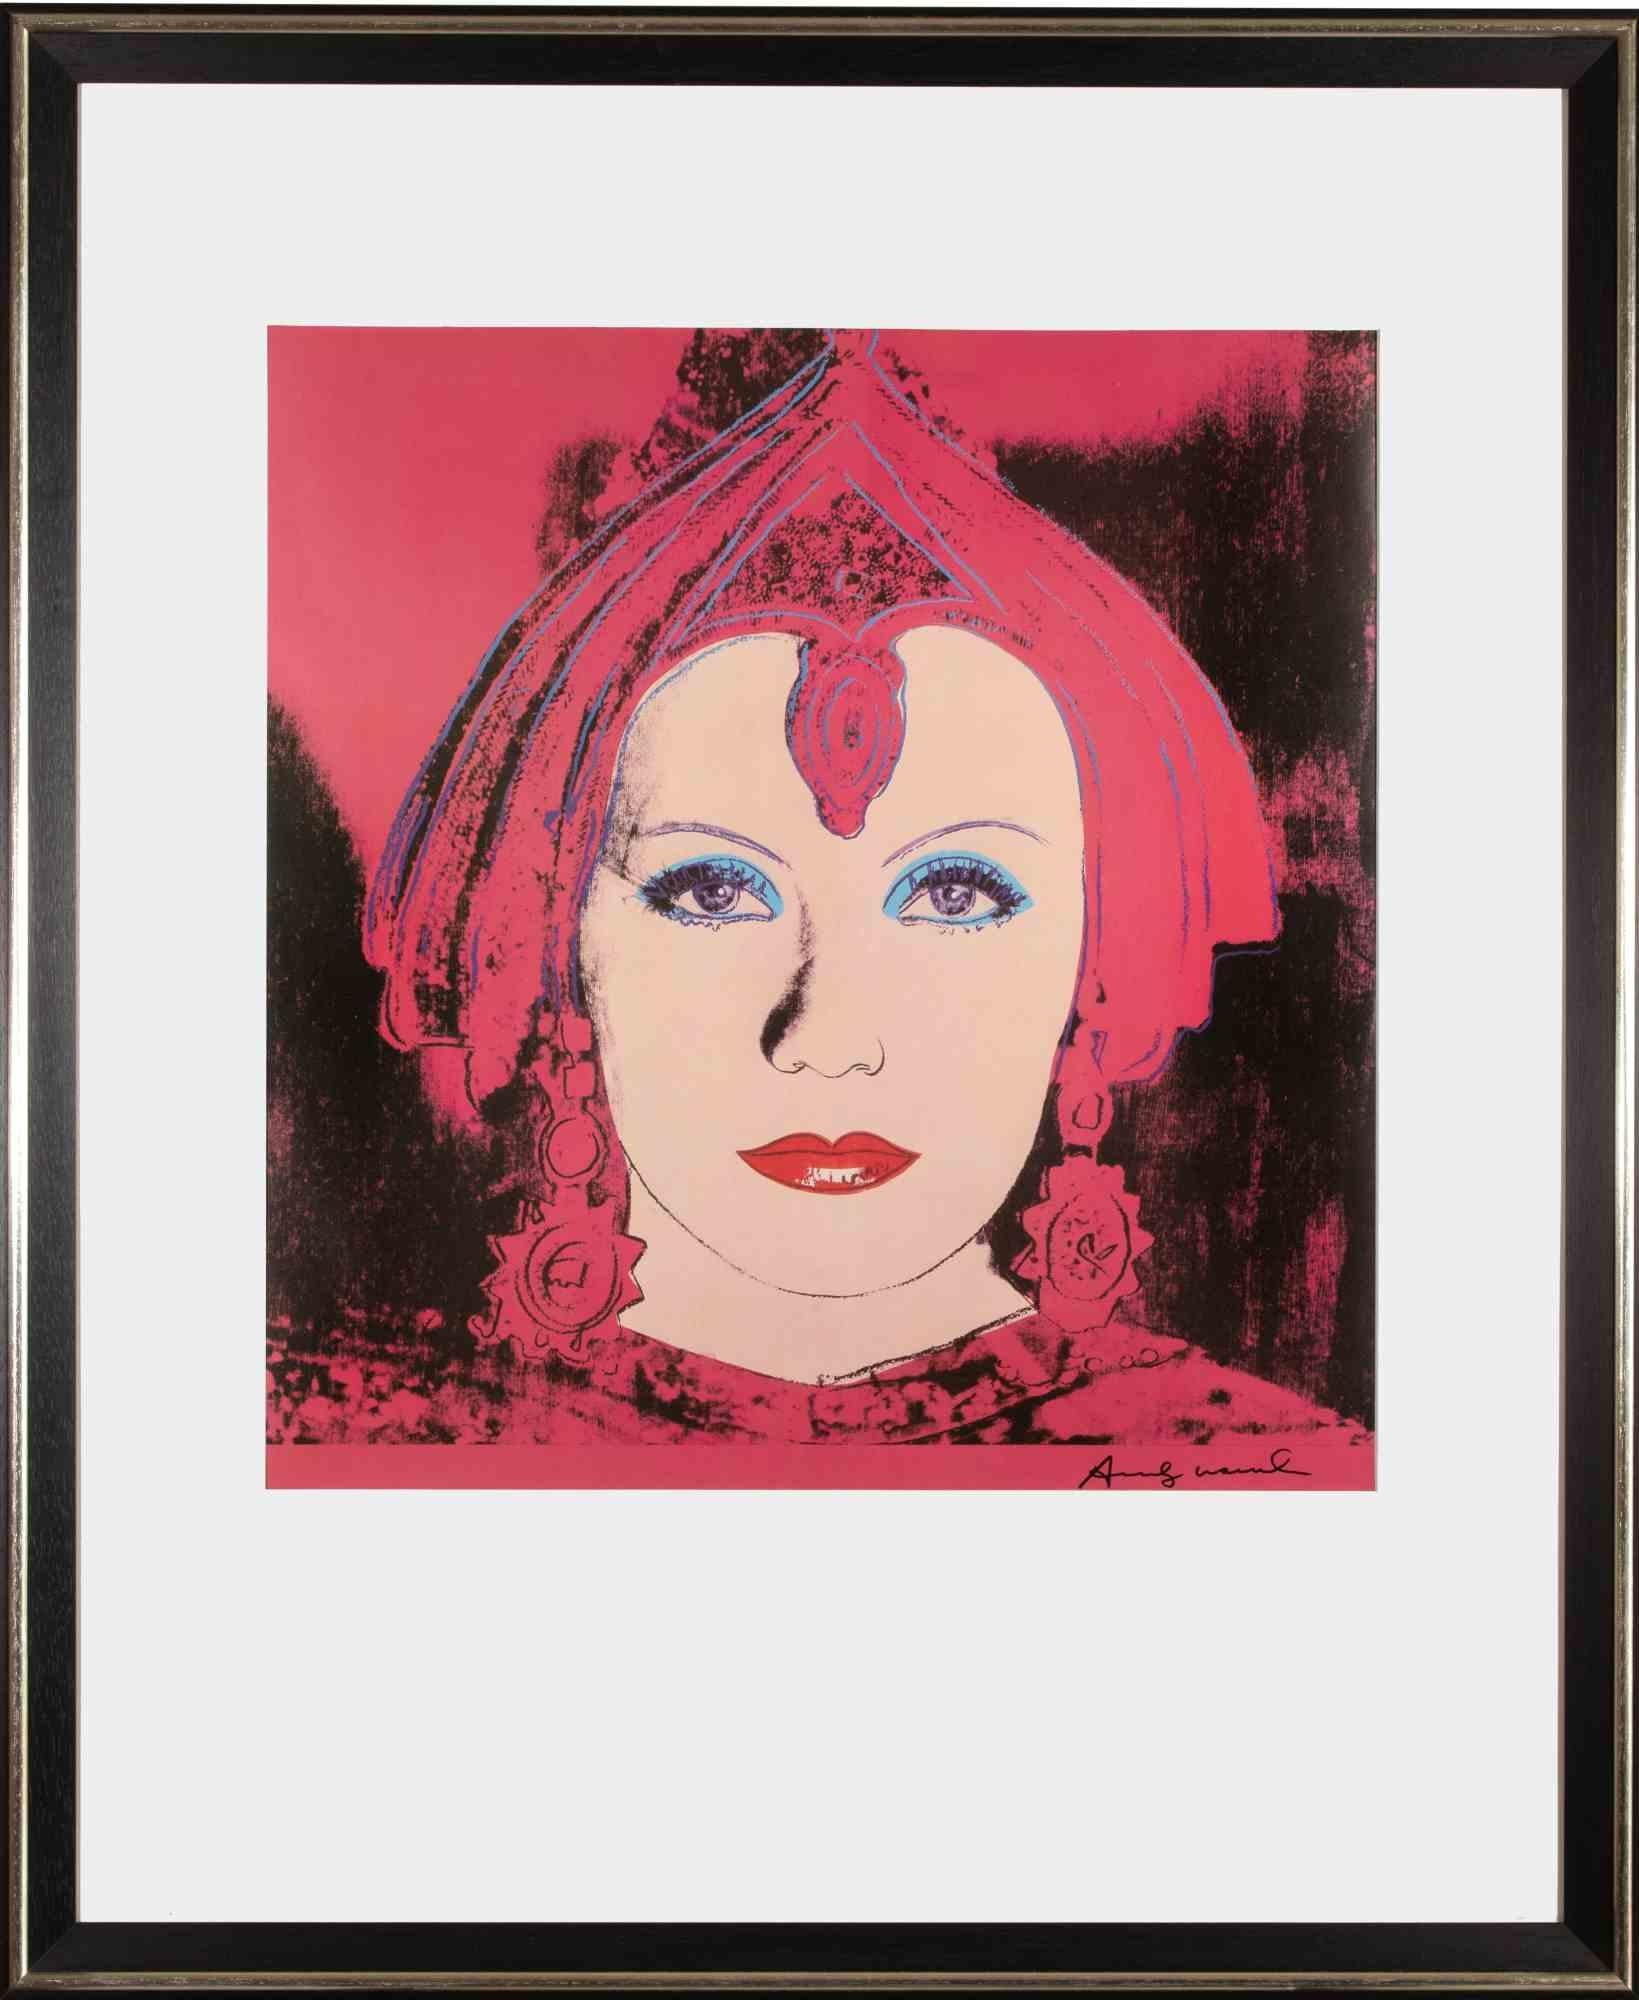 Greta Garbo as Mata Hari is a contemporary artwork realized by Andy Warhol in 1981.

Offset and color lithograph.

Includes frame: 104,5 x 86 x 3 cm.

Hand signed on the lower right.

Ref. Feldman-Schellmann II B. 258-267.

Provenance: Galerie